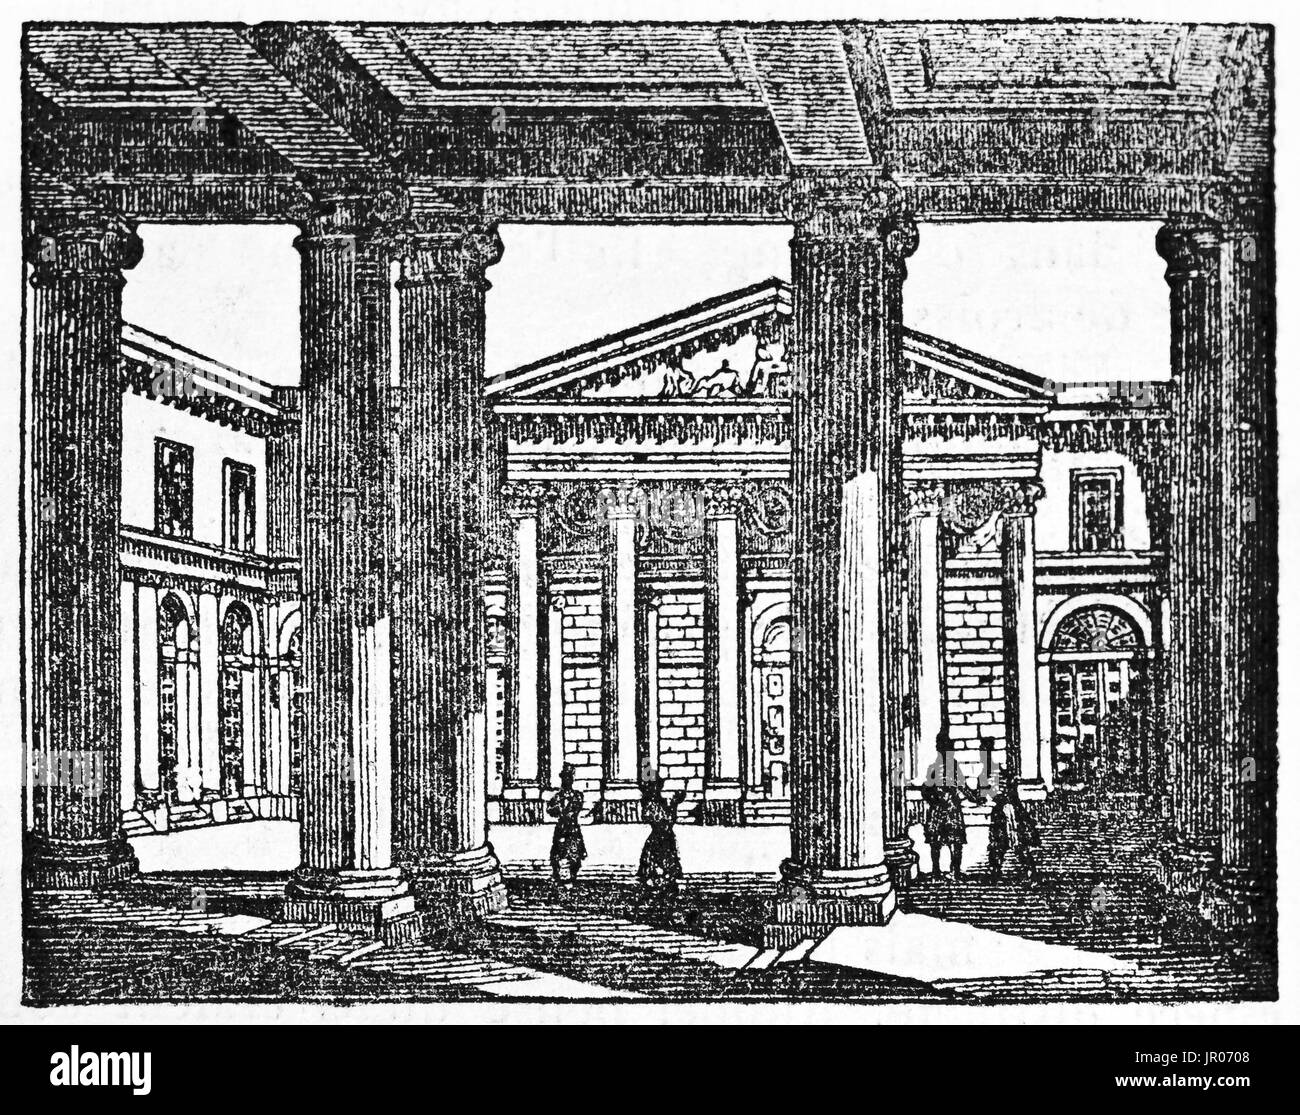 Old illustration of medical school in Paris (Theese days Descartes University). By unidentified author, published on Magasin Pittoresque, Paris, 1833. Stock Photo